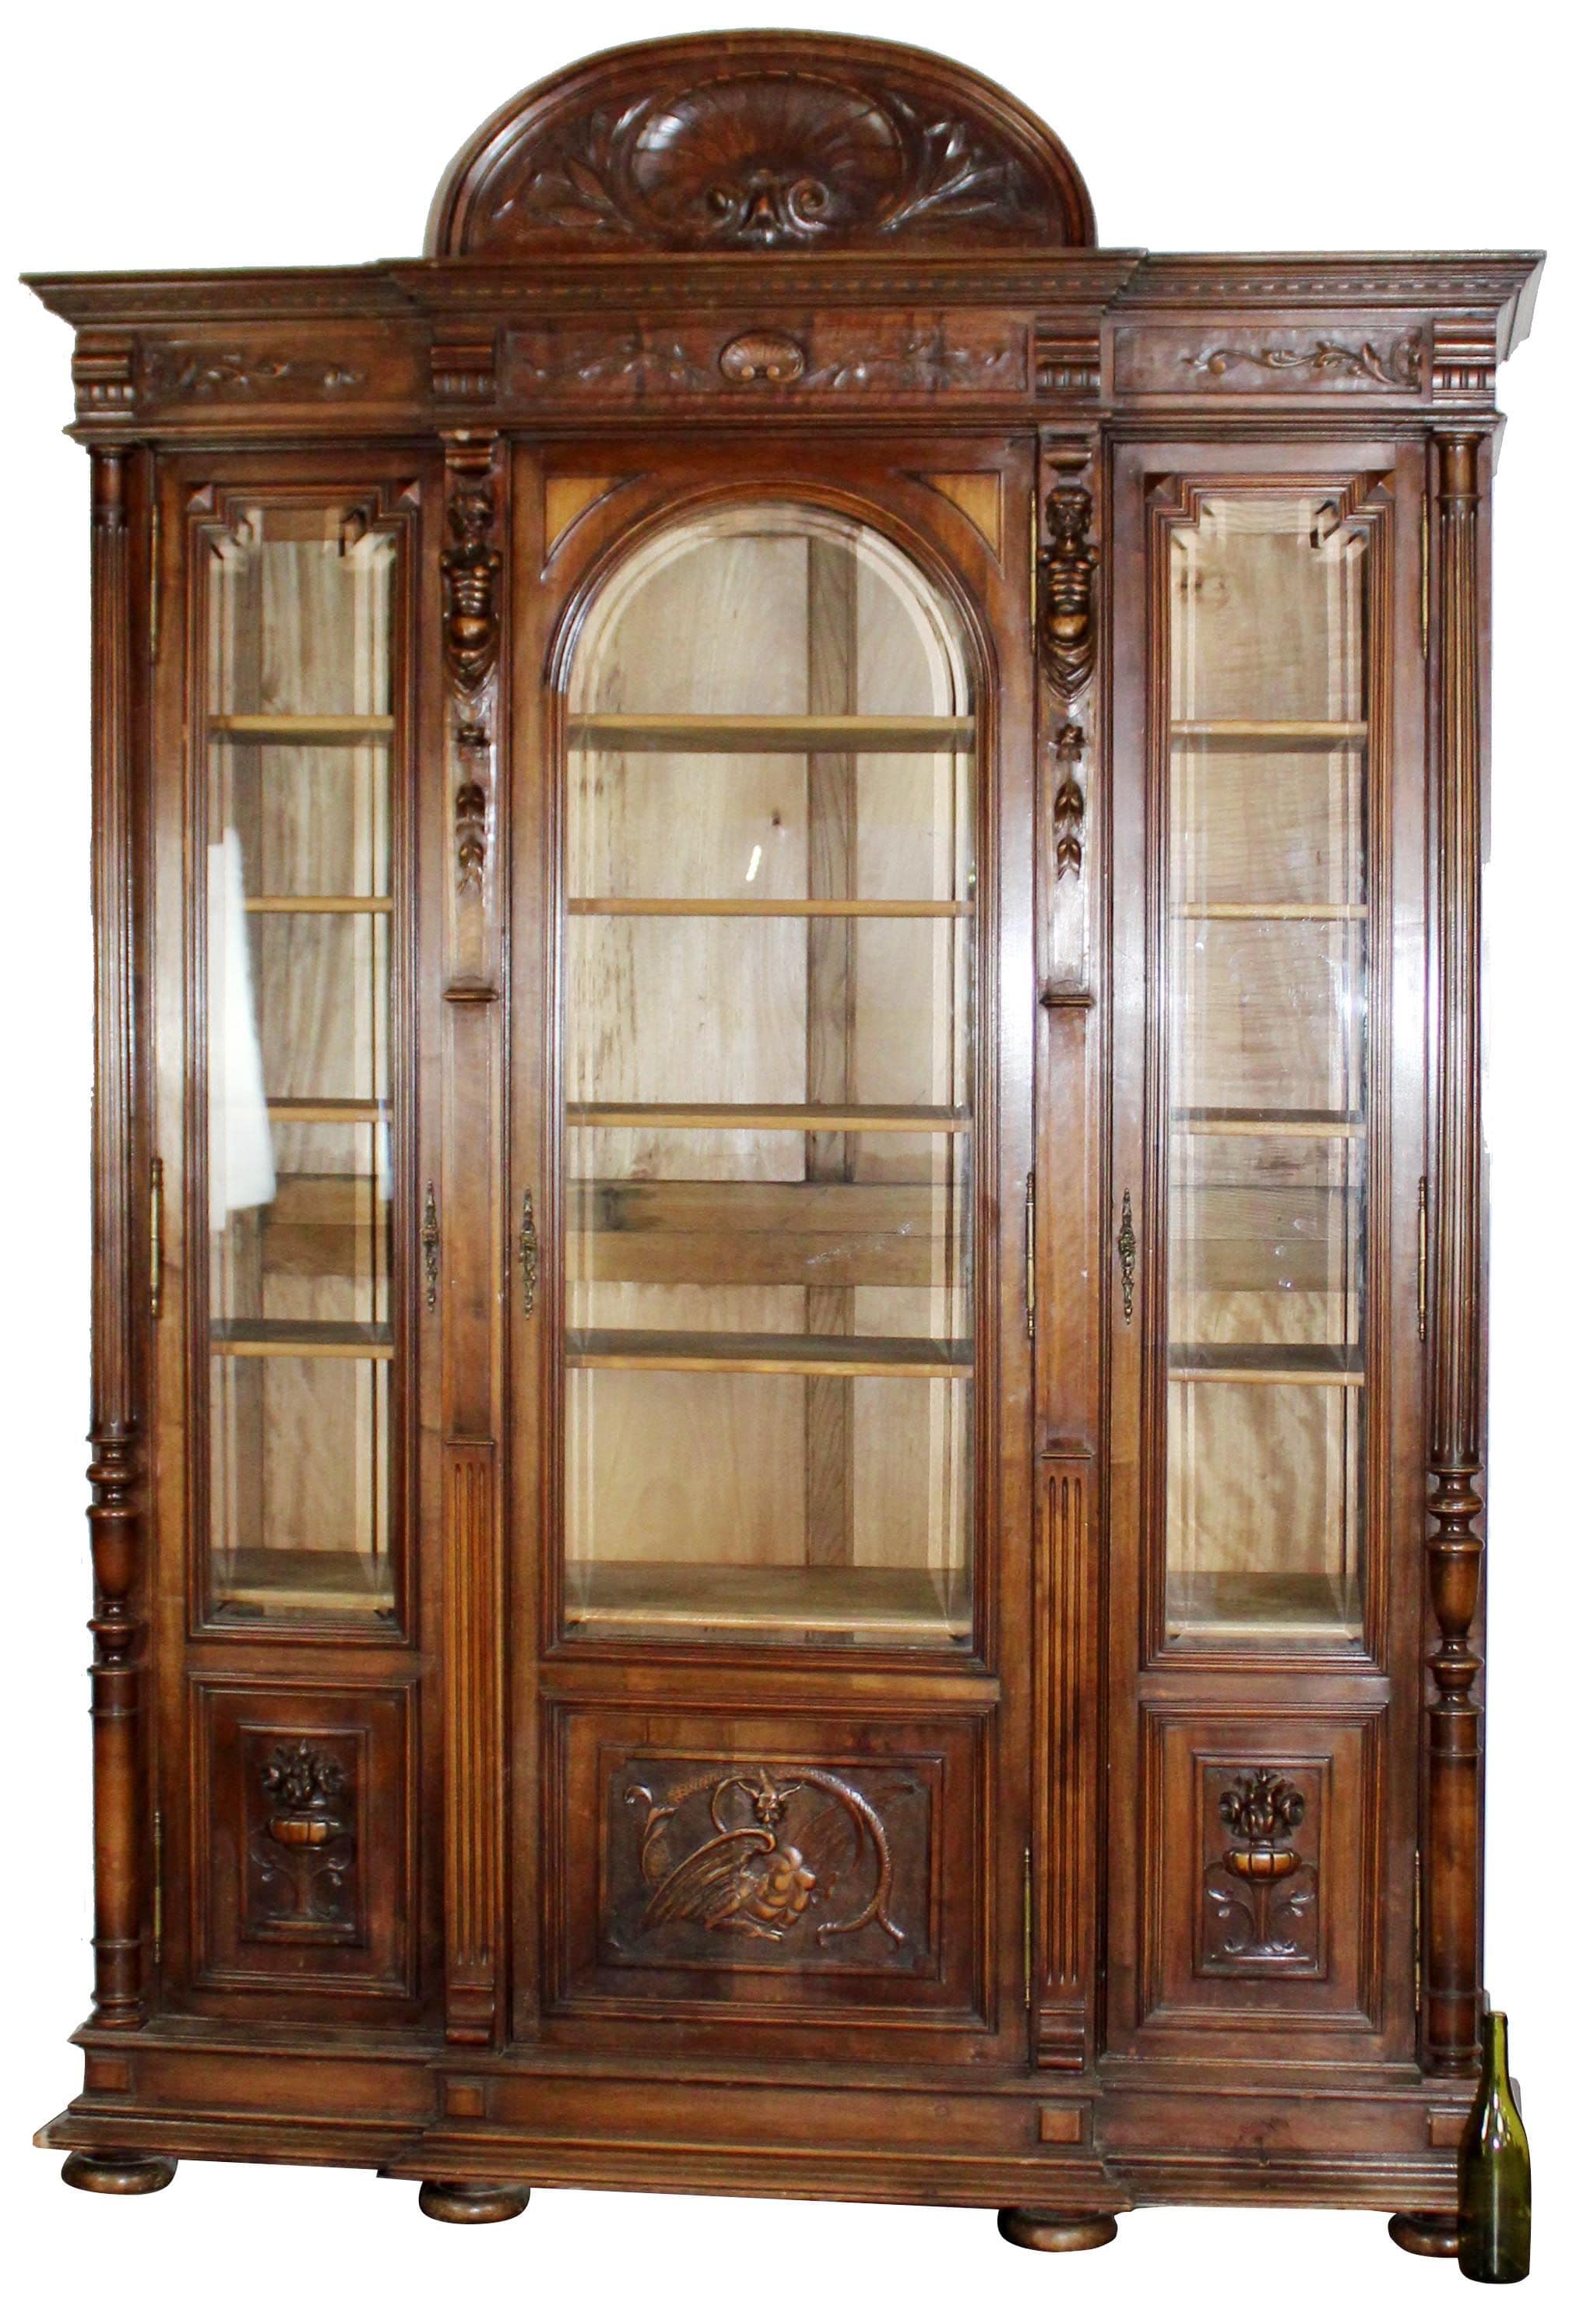 French Neo-Classical bookcase in walnut